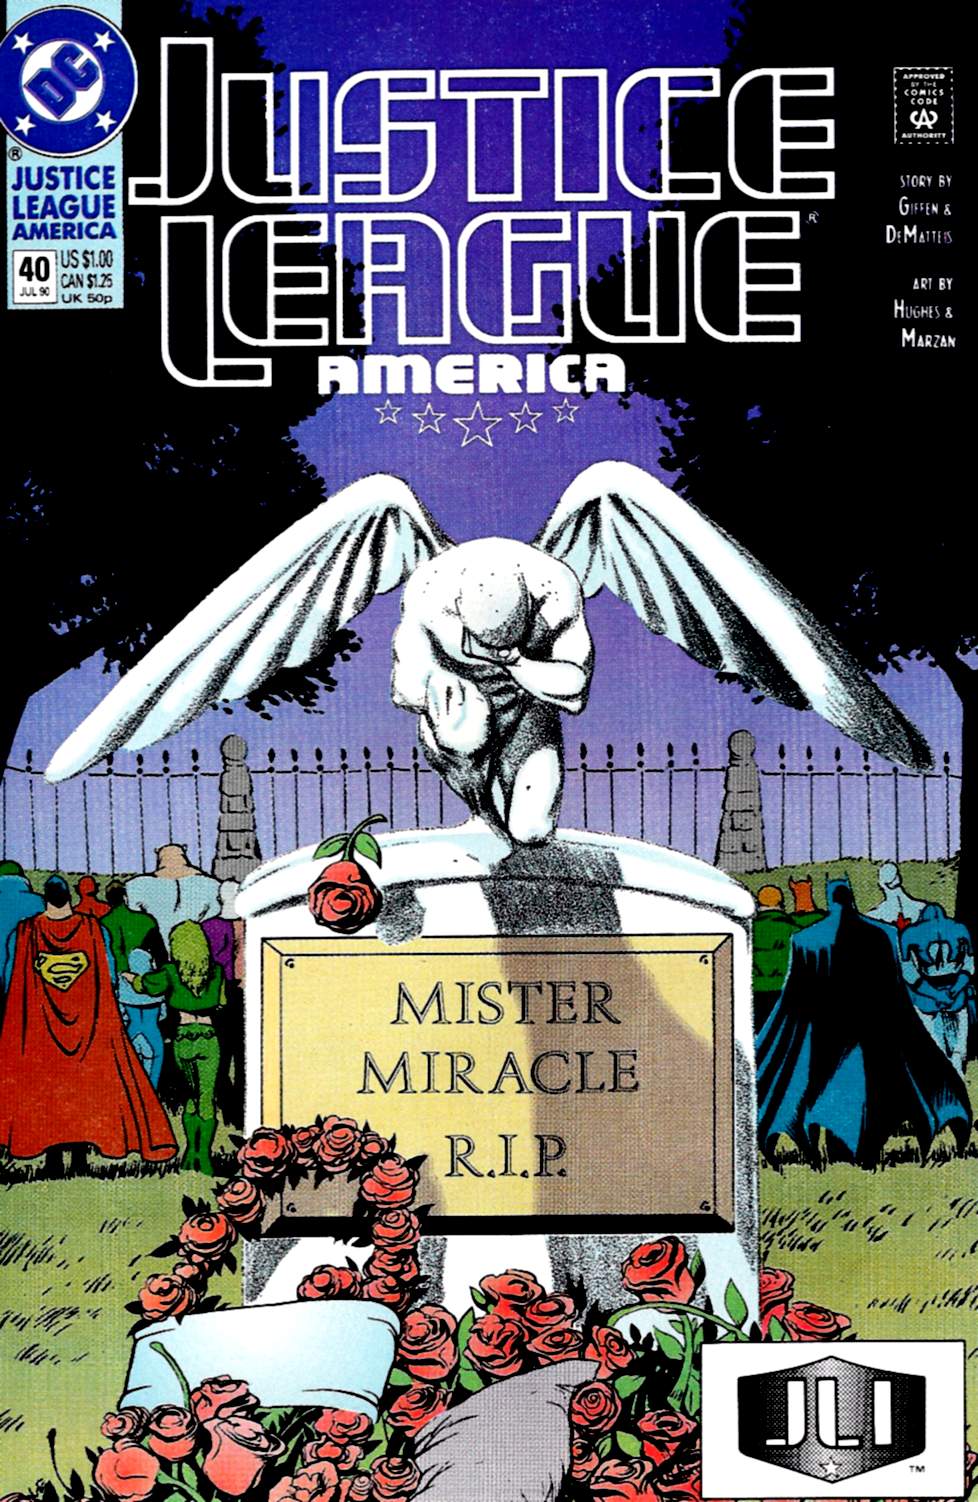 Read online Justice League America comic -  Issue #40 - 1